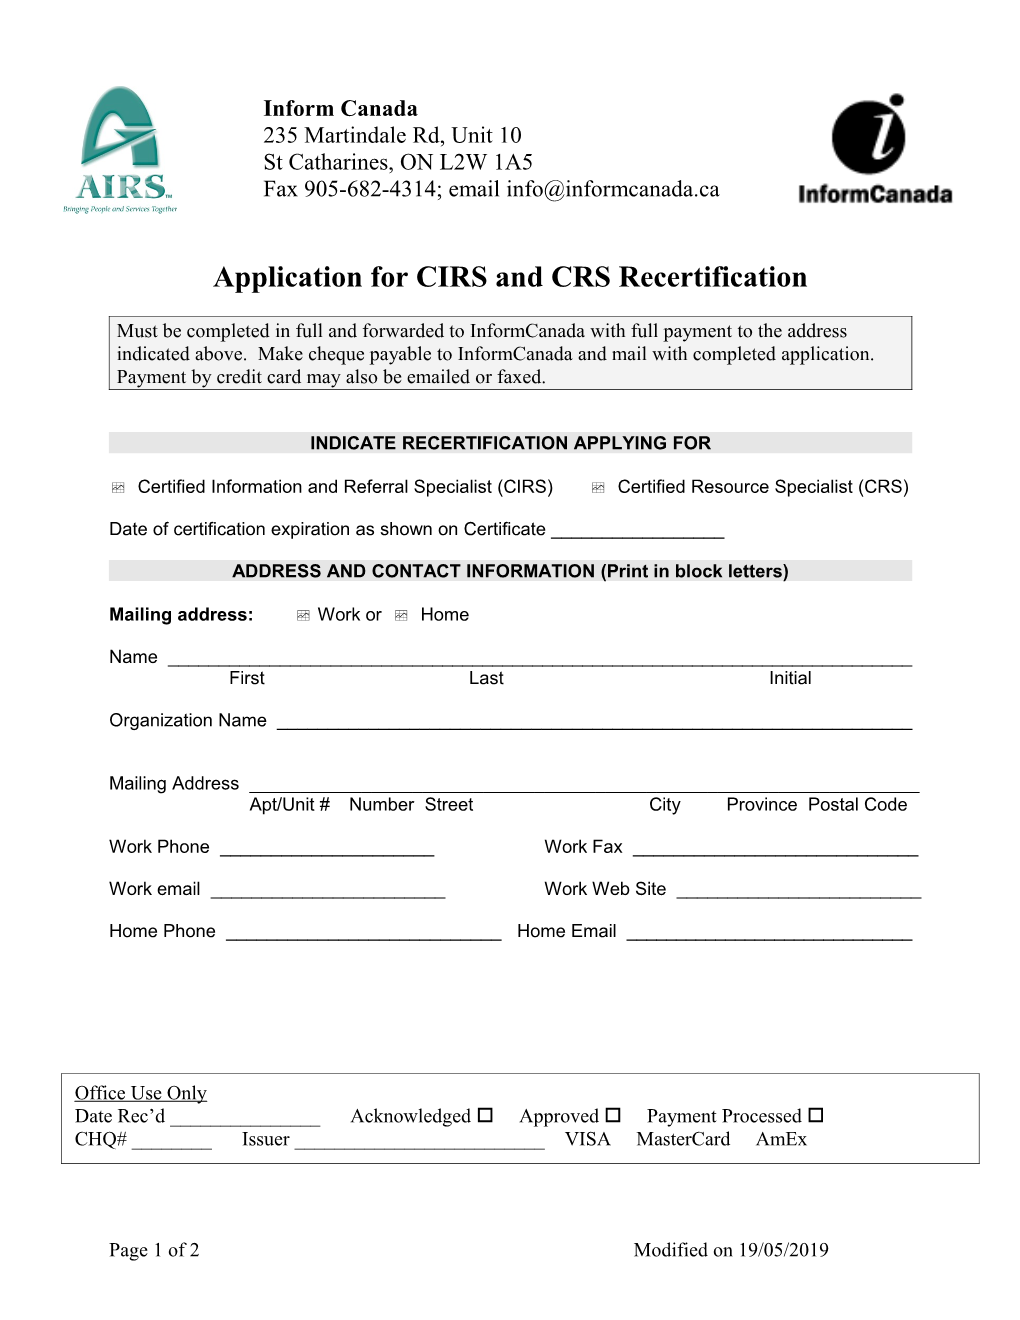 Application for CIRS and CRS Recertification